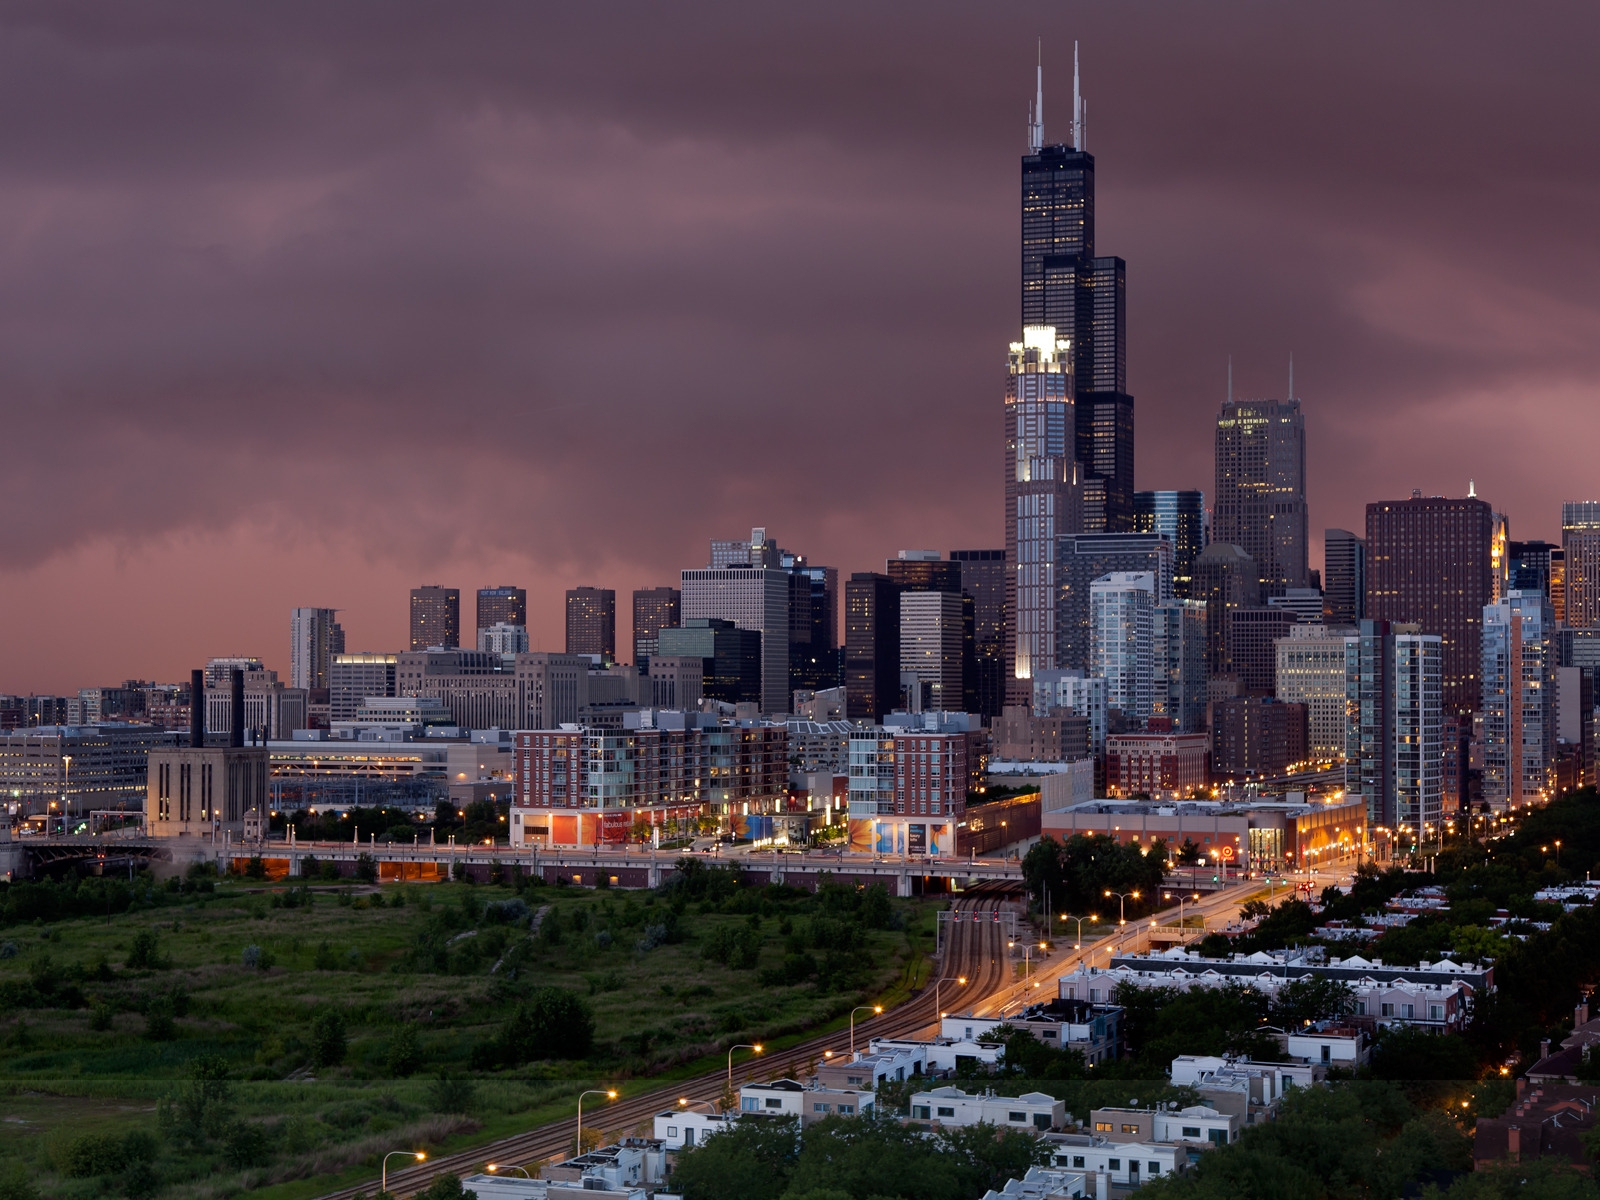 Sunset and Storm in Chicago for 1600 x 1200 resolution